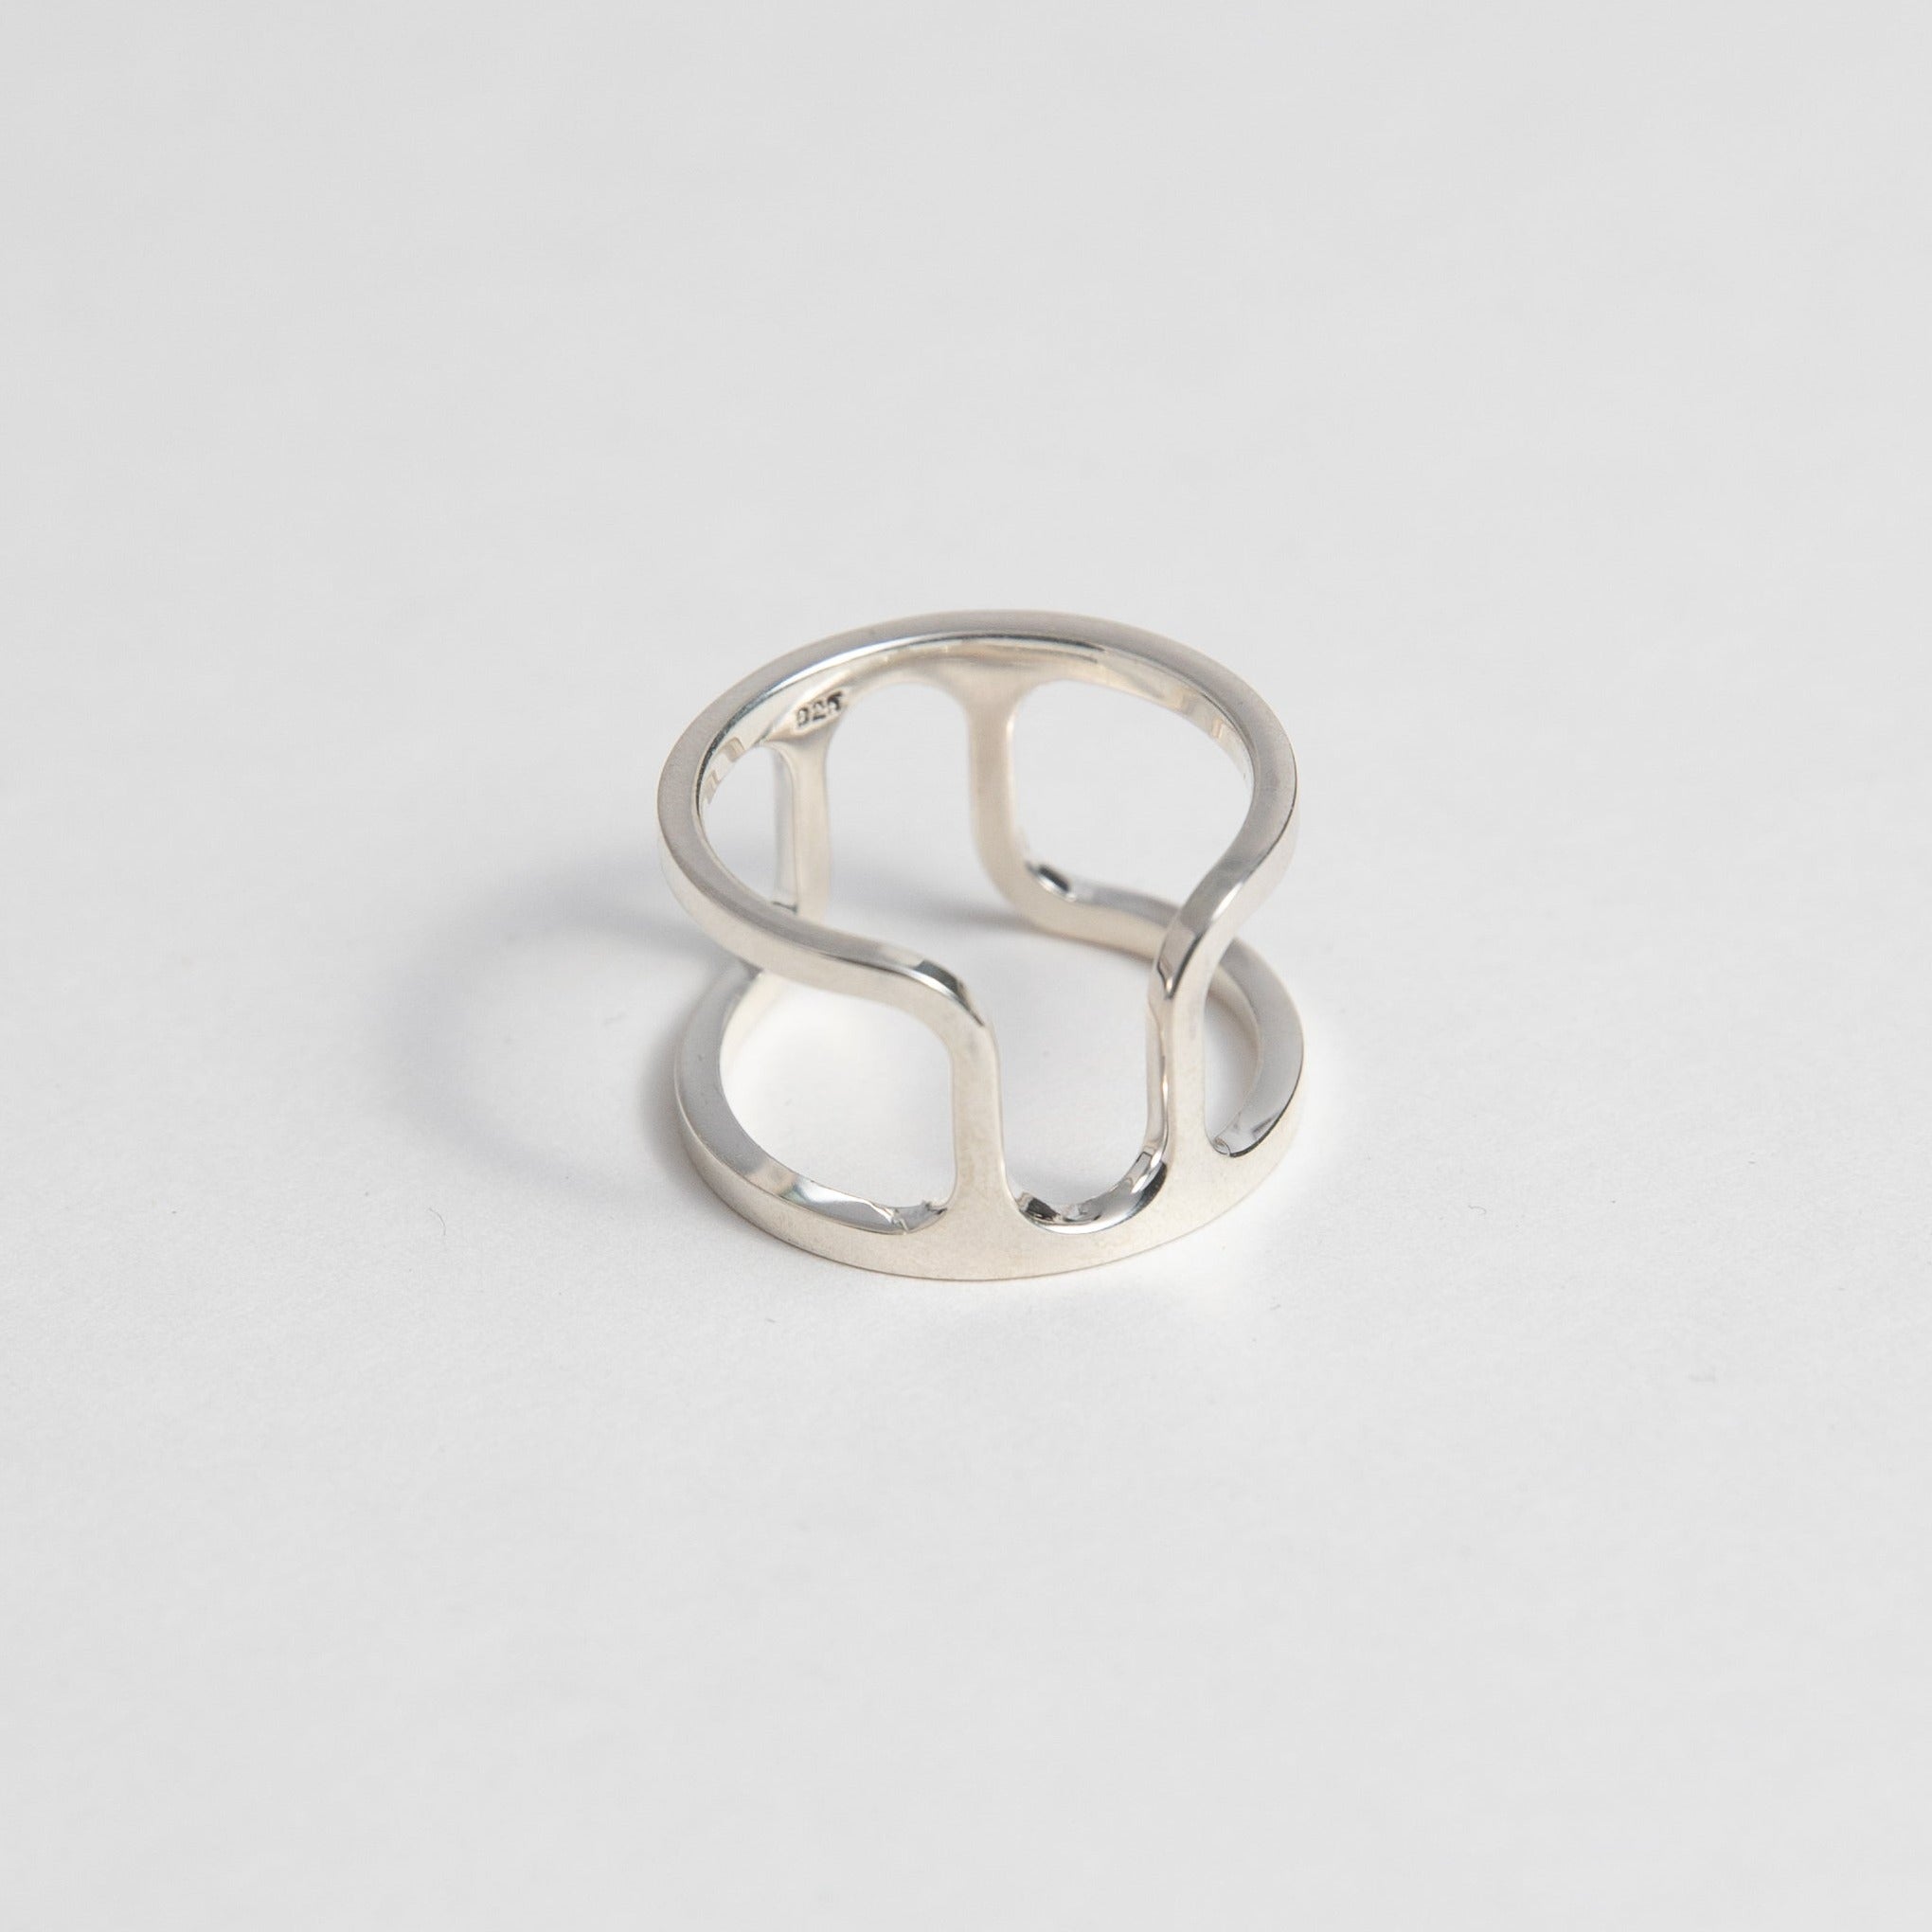 Coteri Minimal Ring in sterling silver by SHW Fine Jewelry in New York City